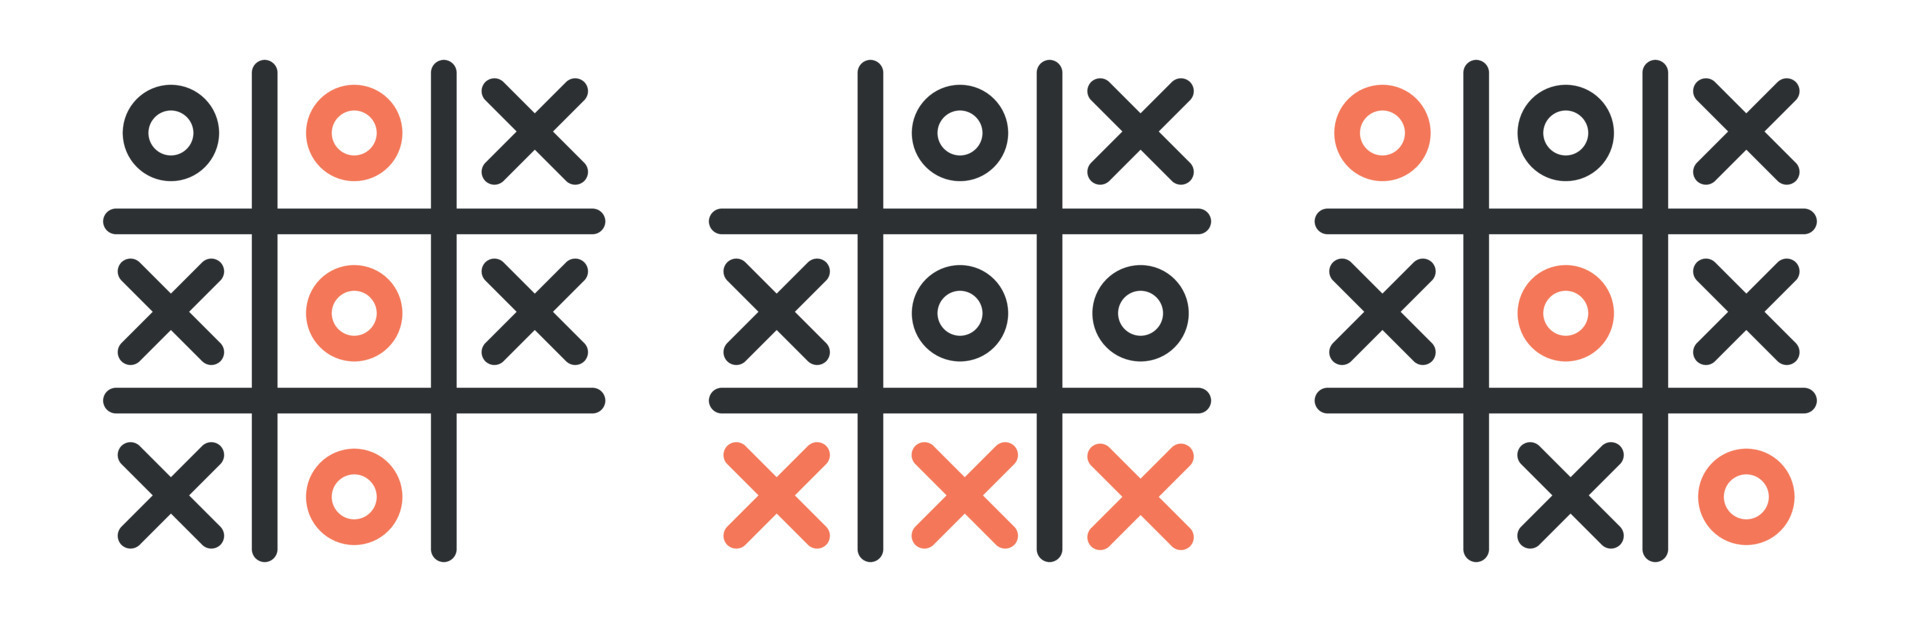 How To Win Tic Tac Toe 